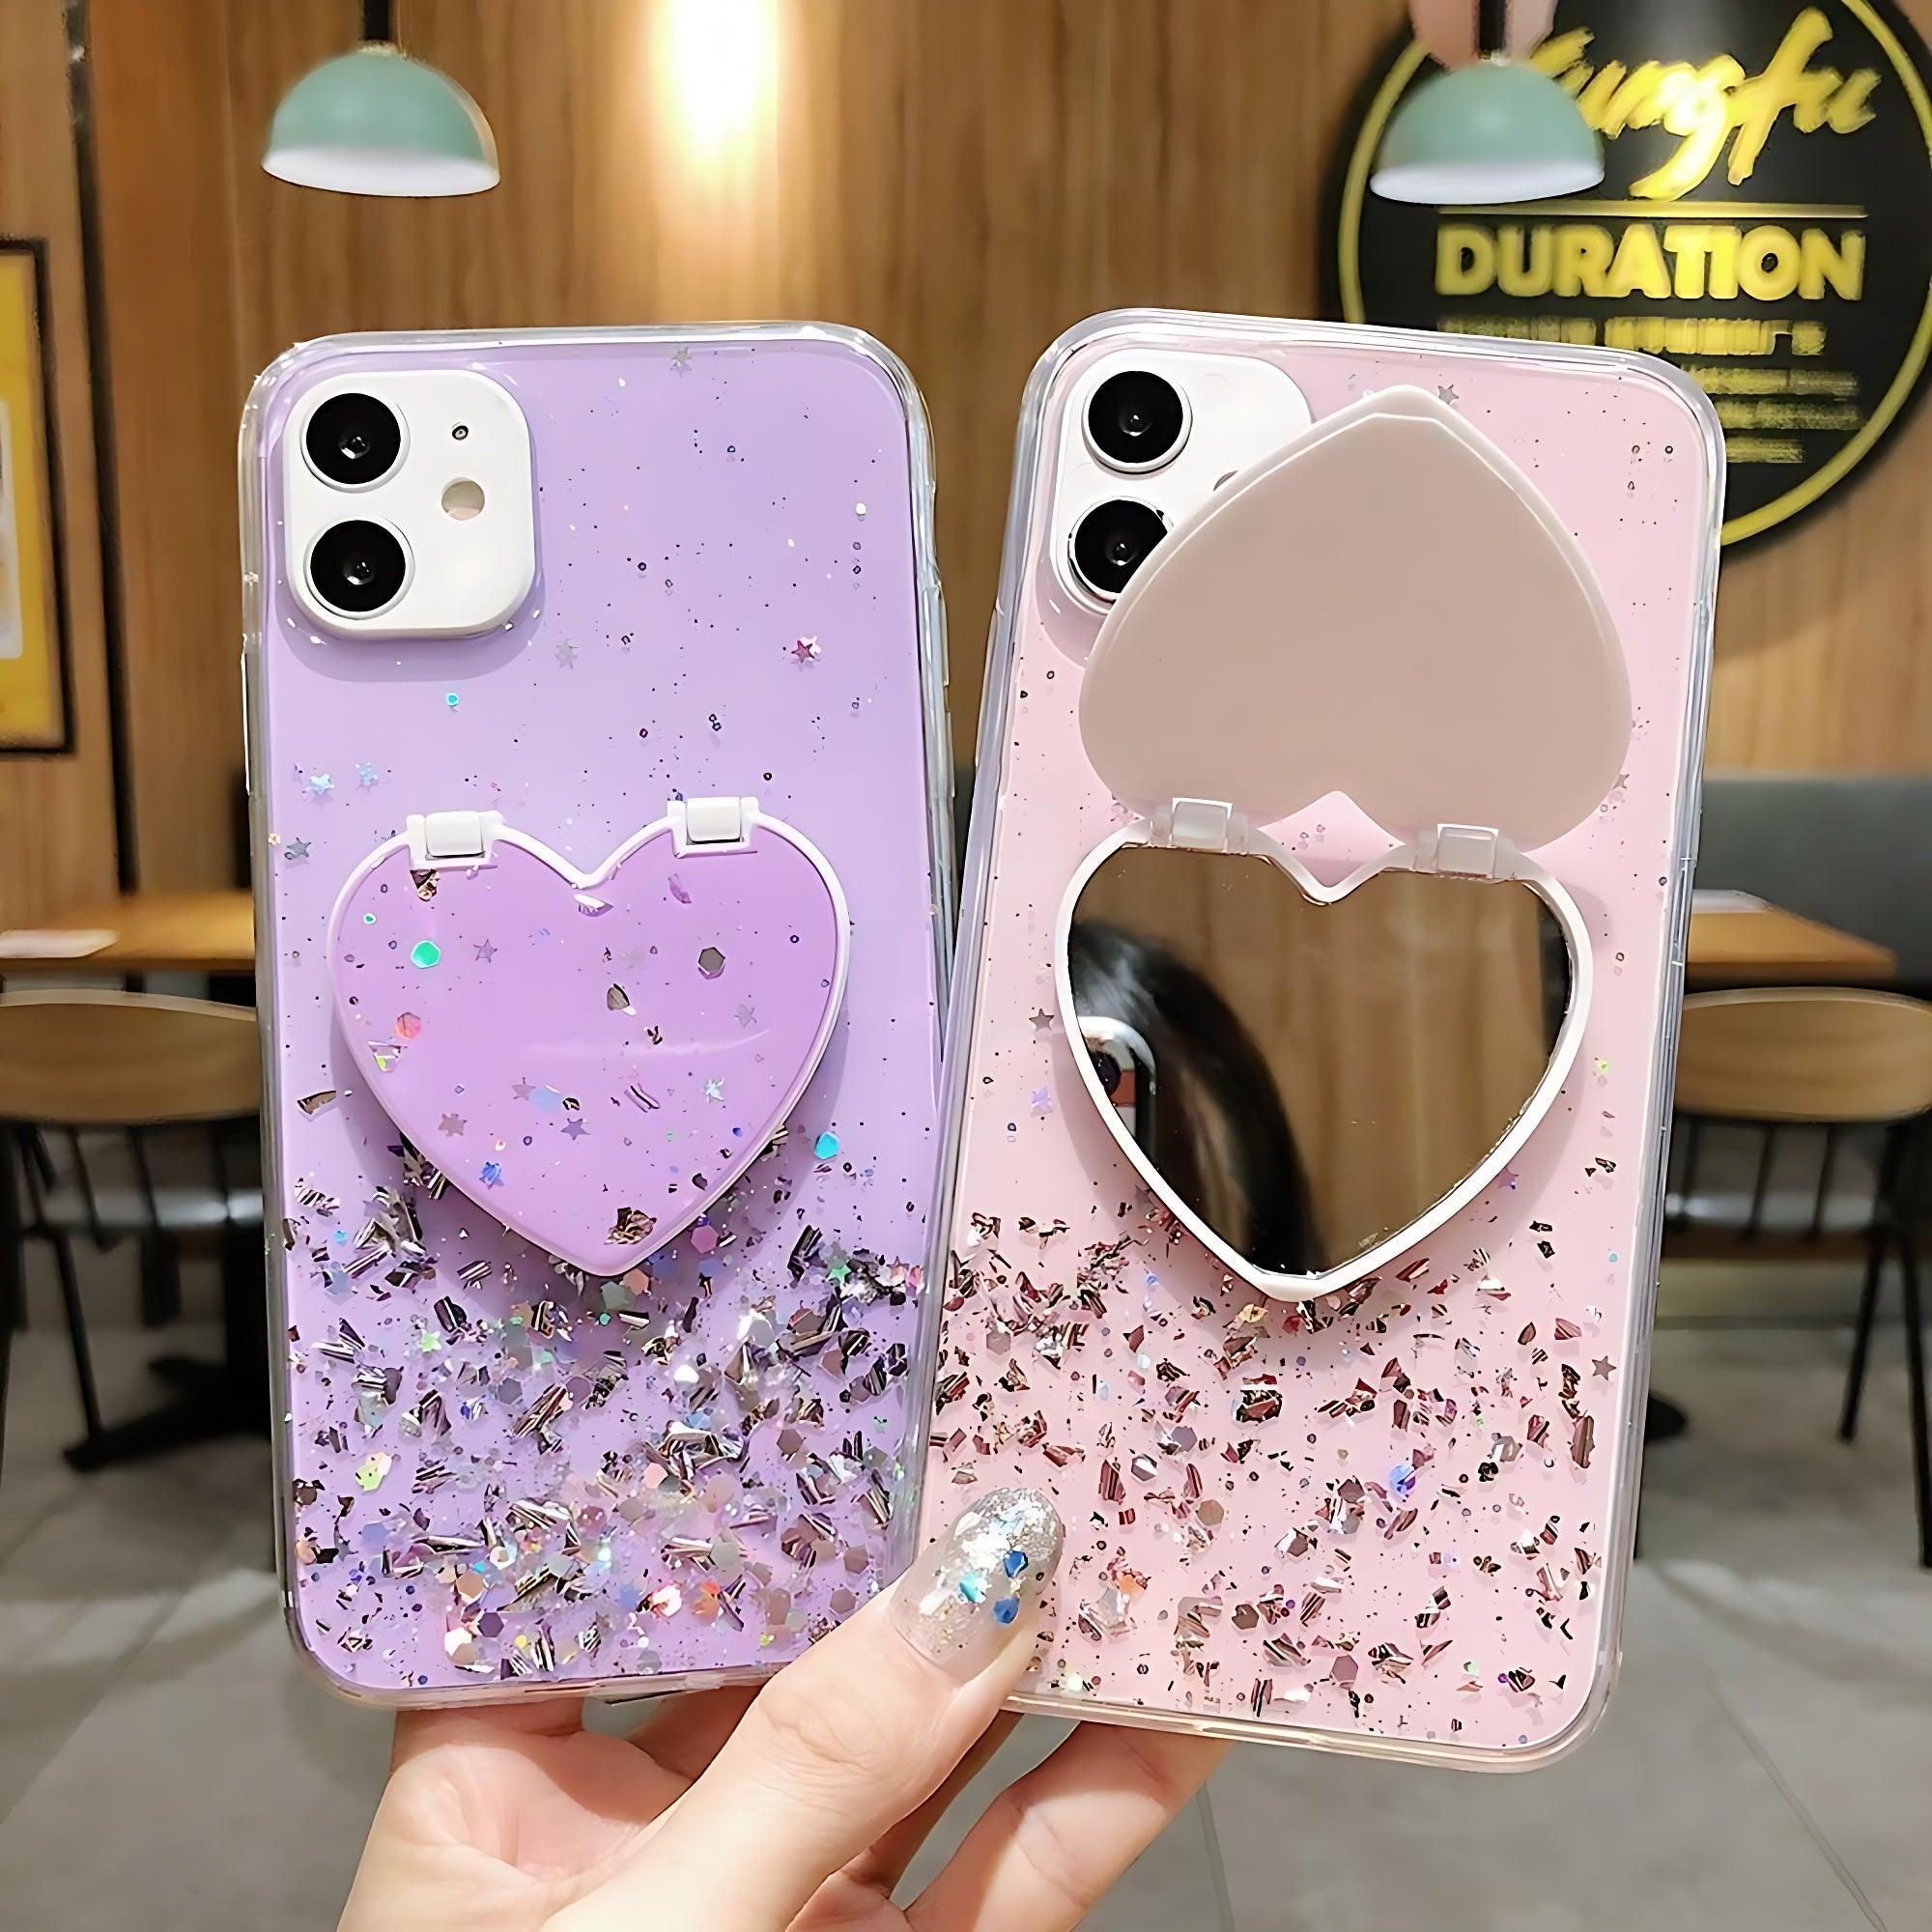 Best Friend Phone Cases - Touchy Style .